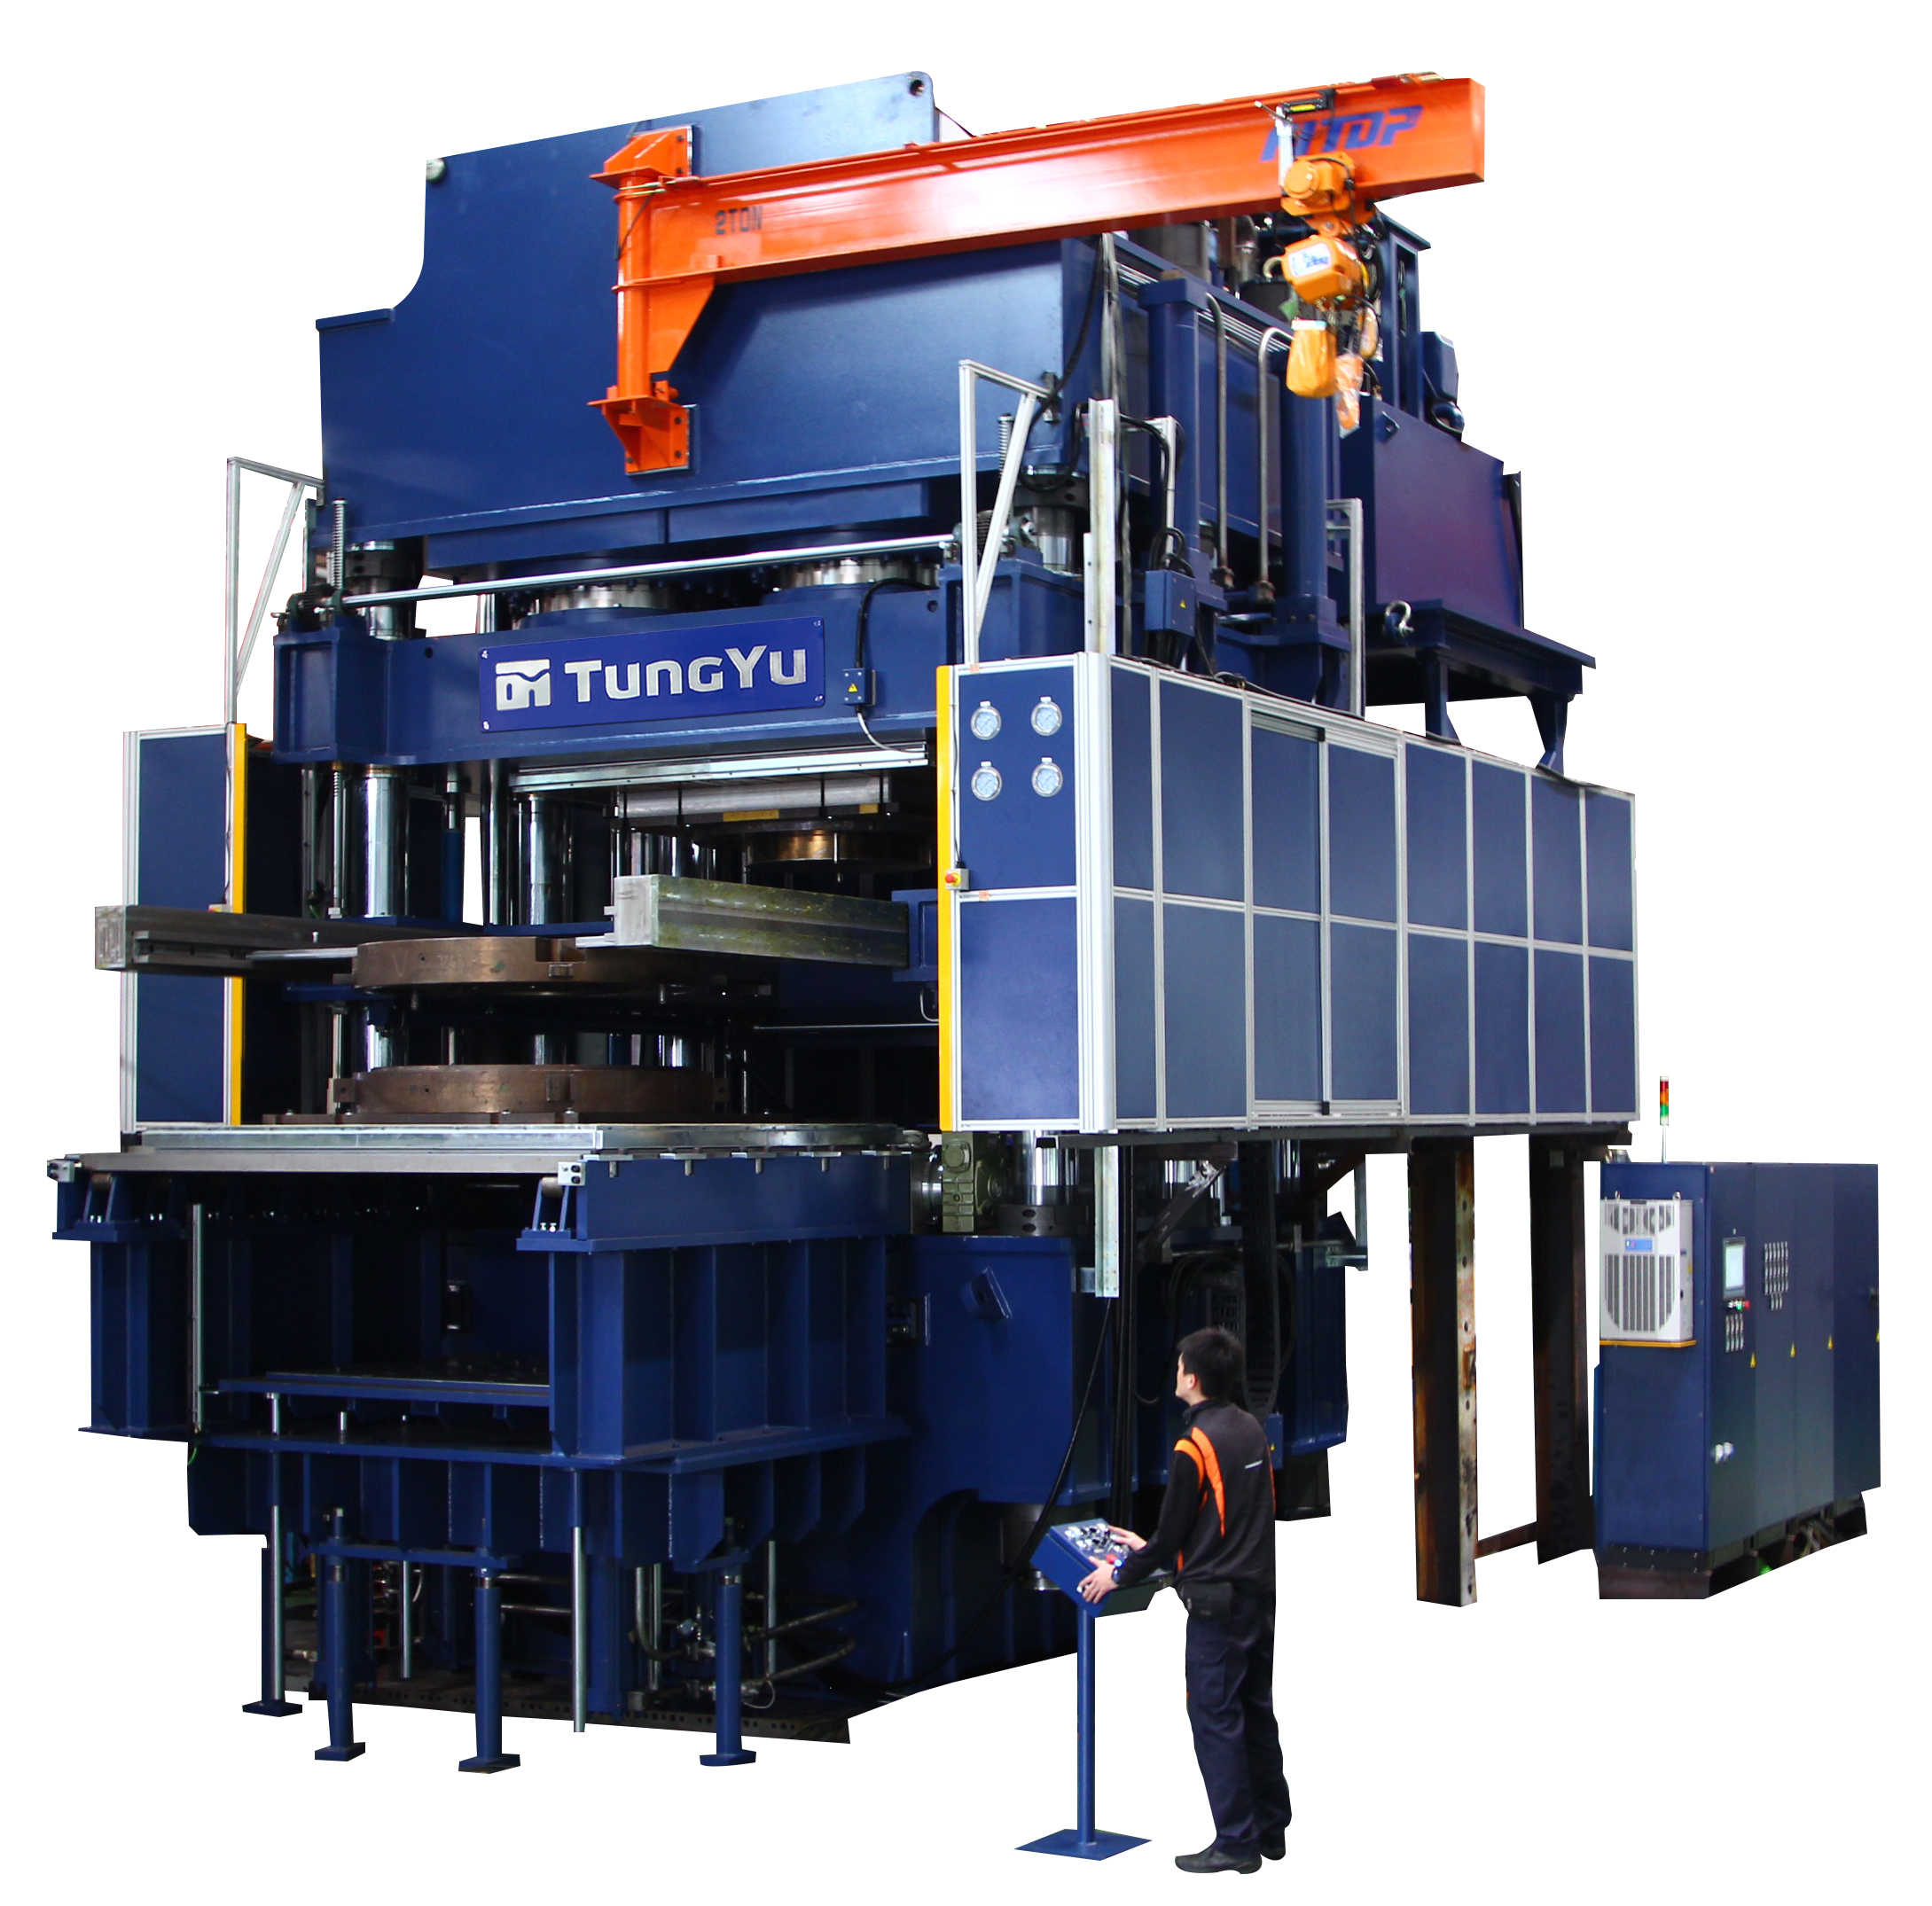 Demonstrate the strongest customized technology launch the market's largest forming press